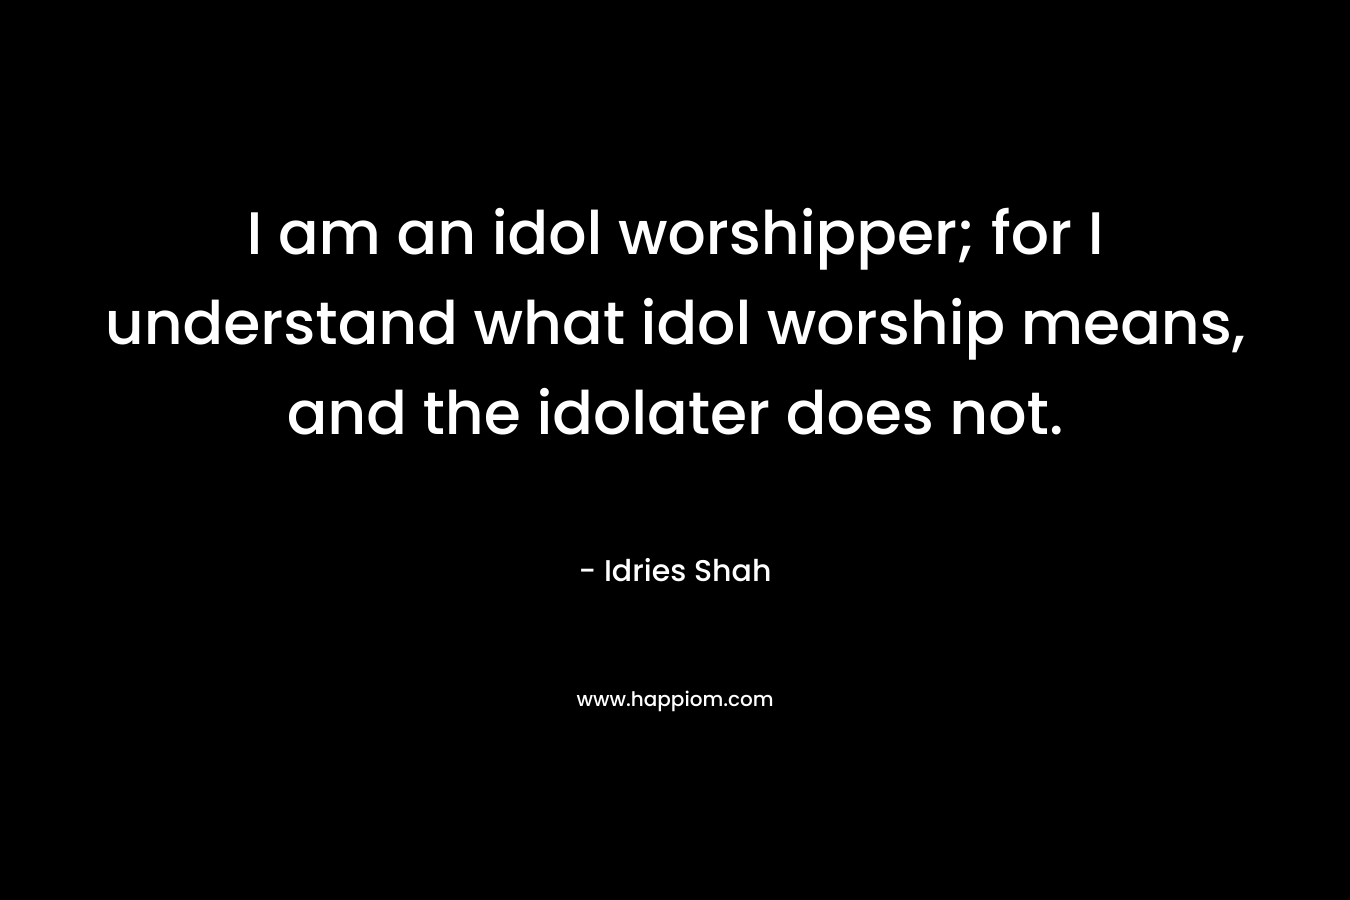 I am an idol worshipper; for I understand what idol worship means, and the idolater does not.